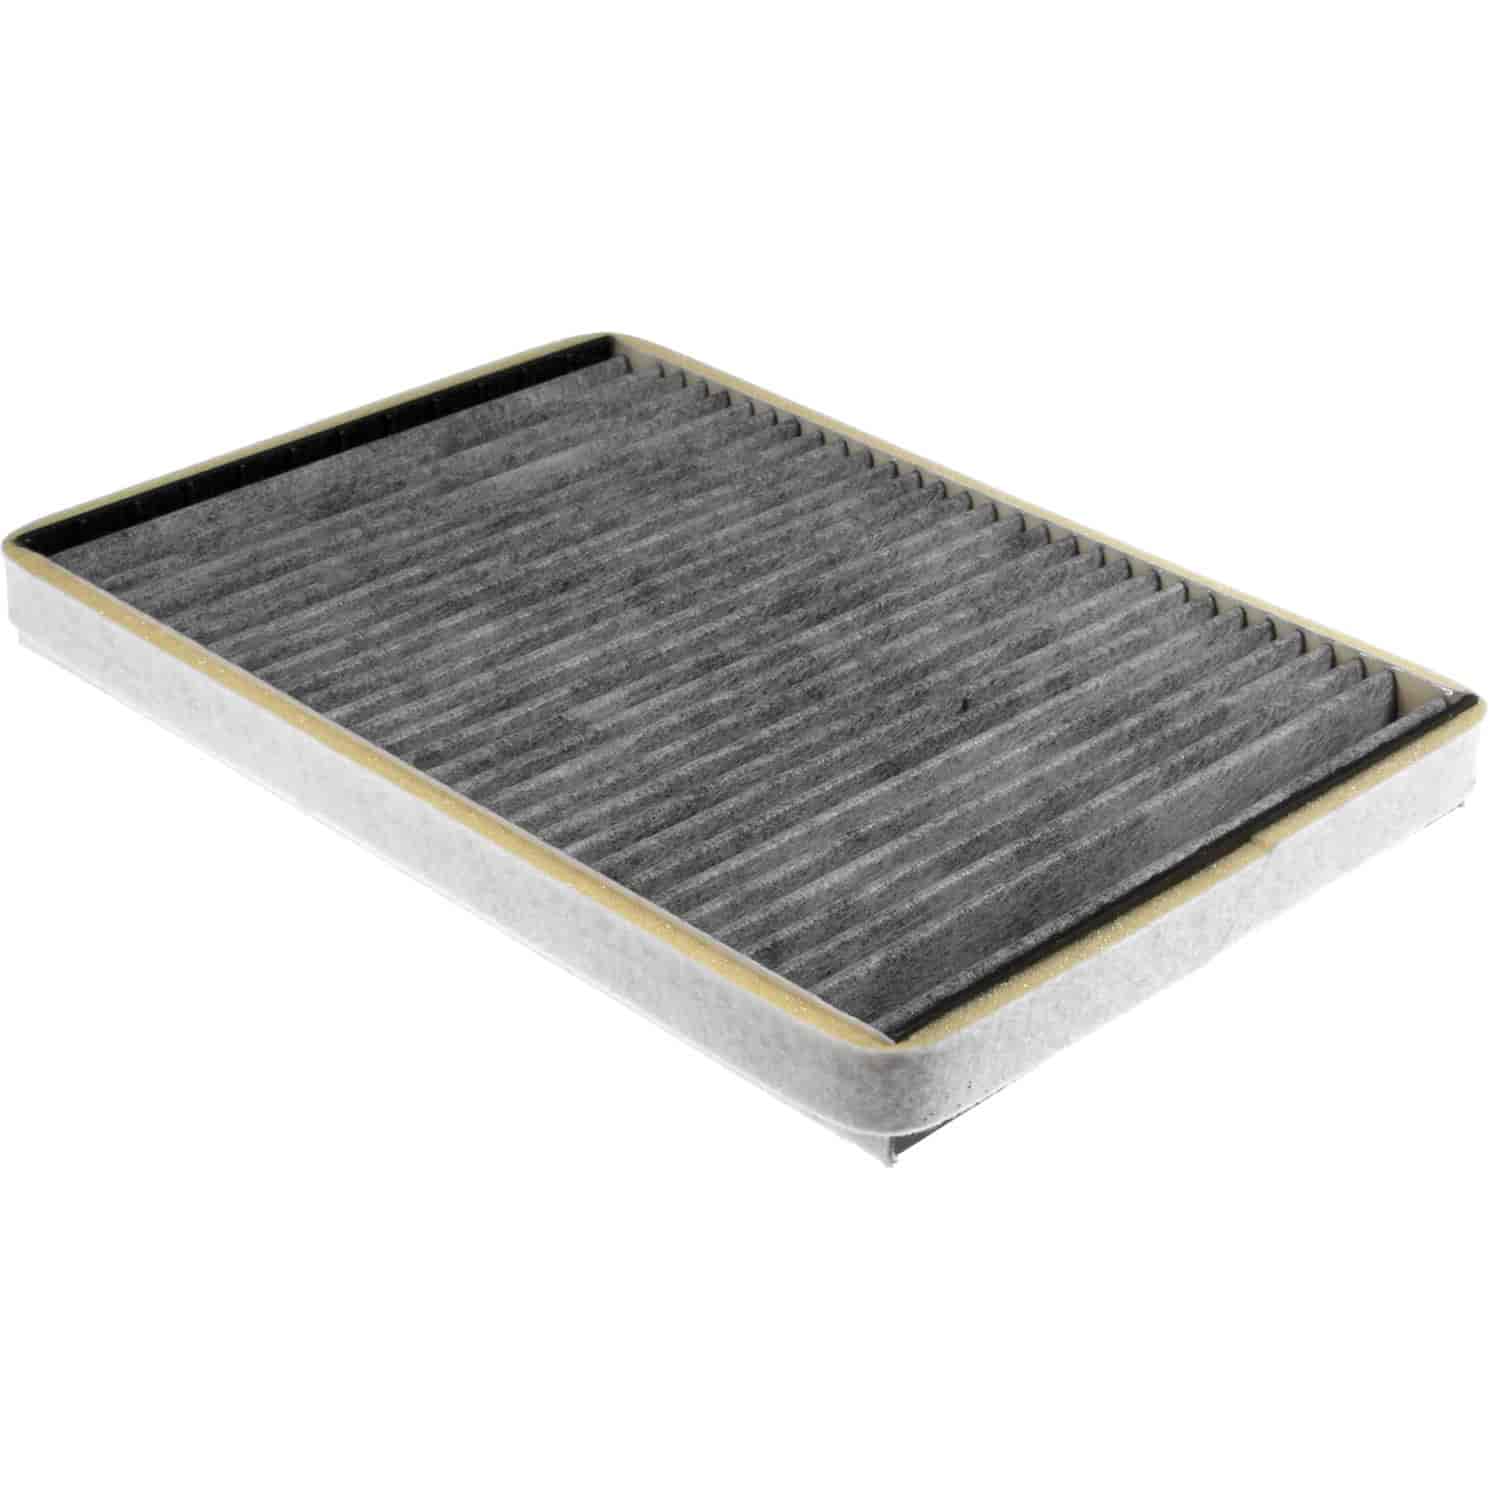 Mahle Cabin Air Filter Saturn Astra 1.8L 2008-2009